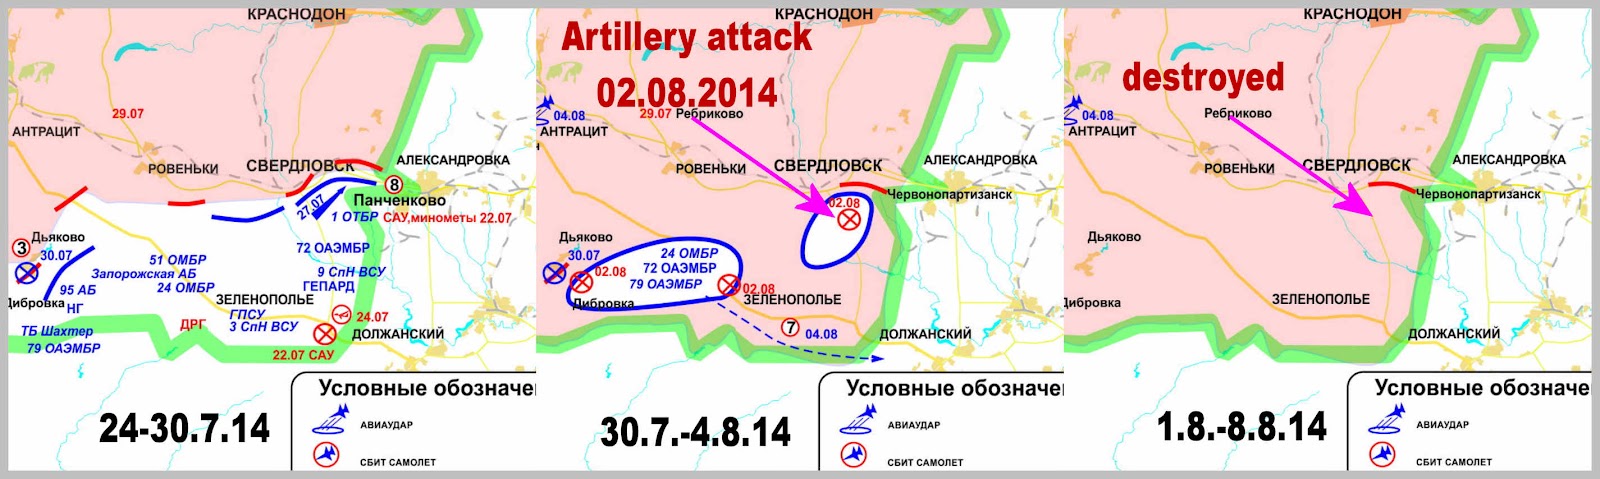 Battles southeast of Sverdlovsk from mid-July to early August 2014 (map from pro-russian sites)